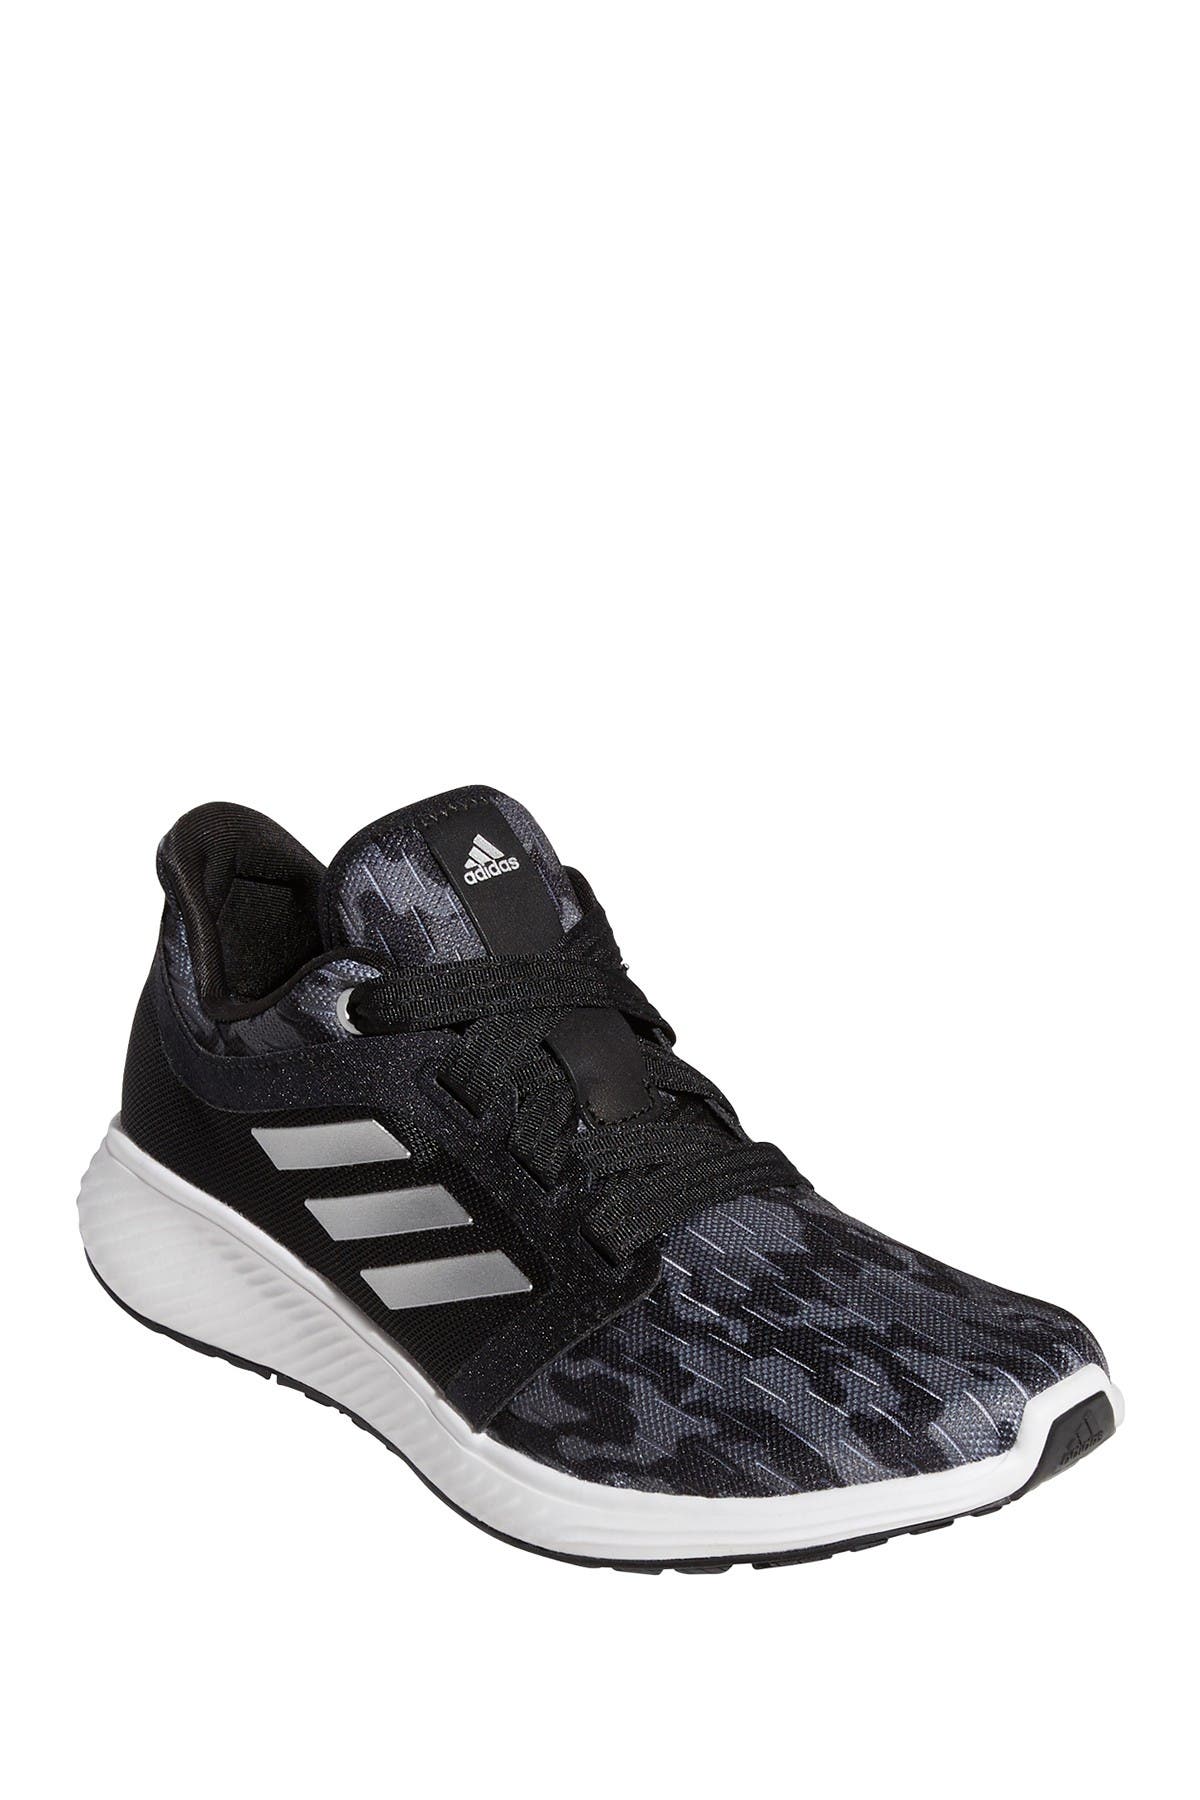 adidas edge lux sneakers